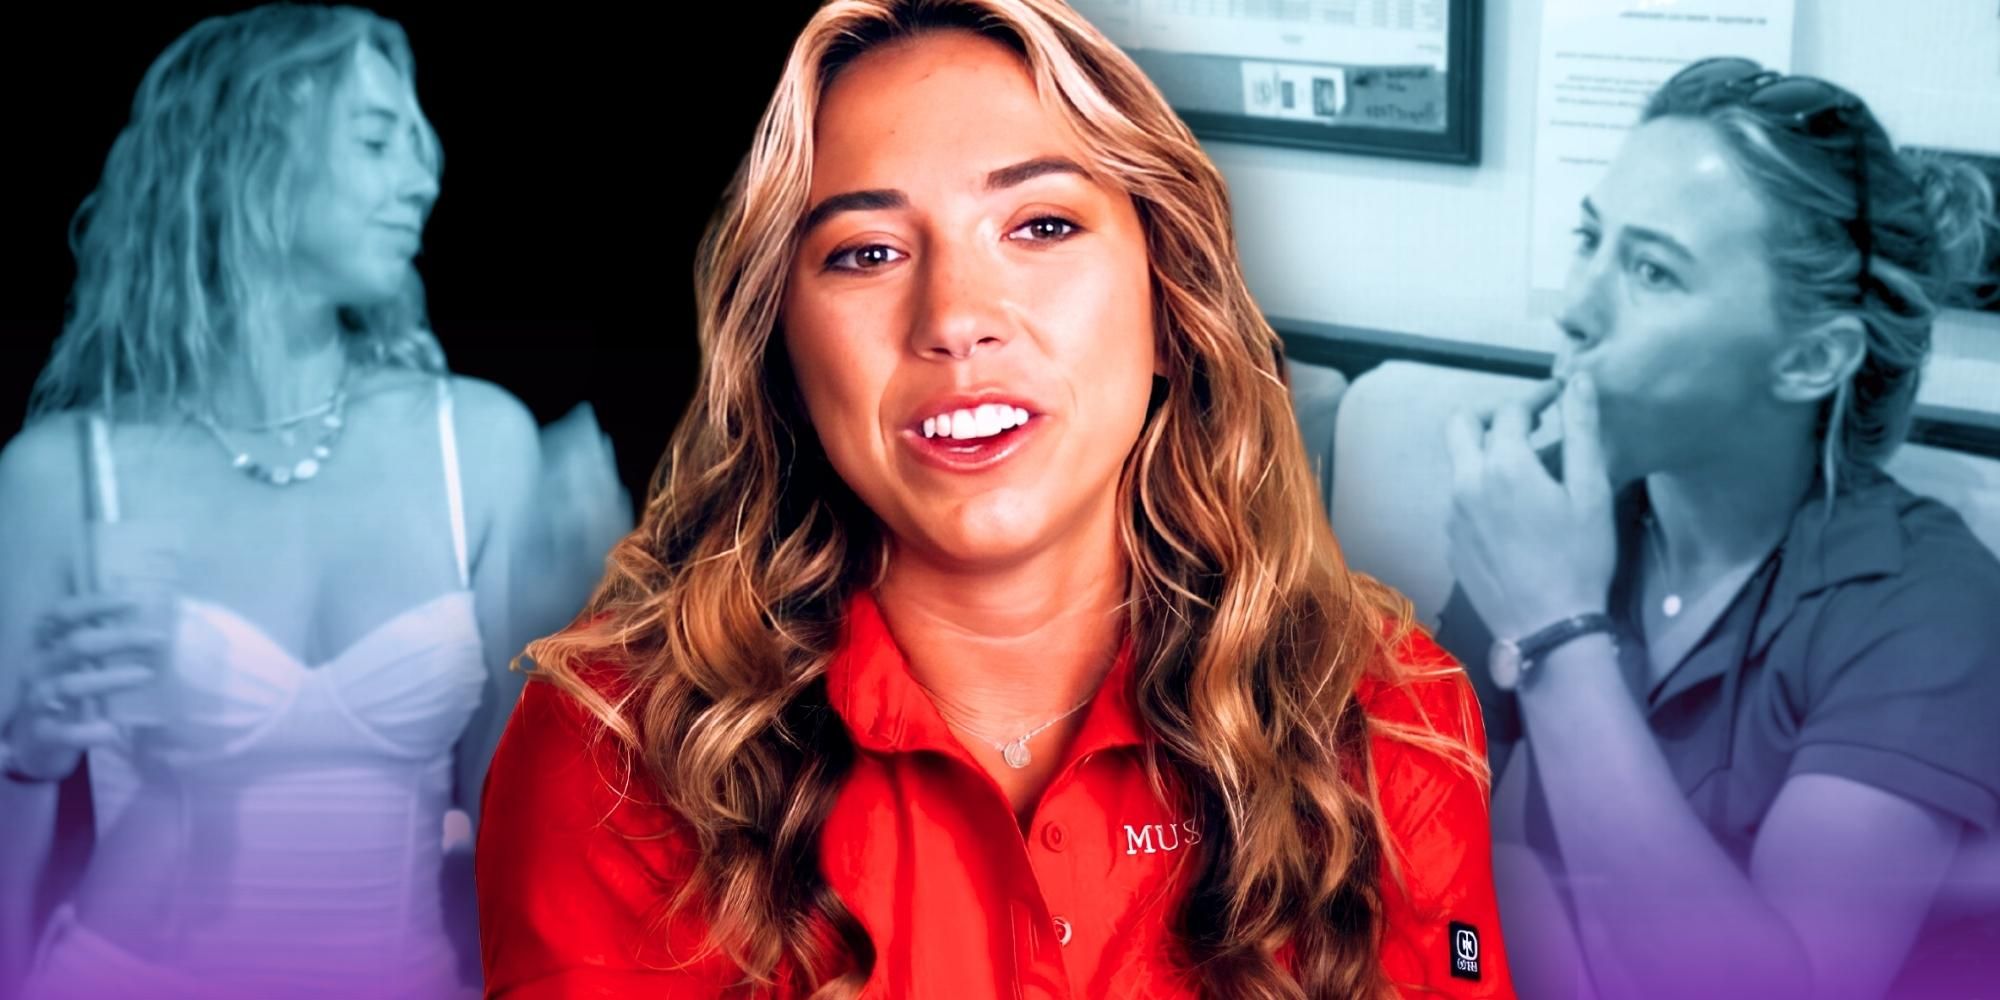 Montage of Below Deck Med's Haleigh Gorman in confessional wearing a red shirt